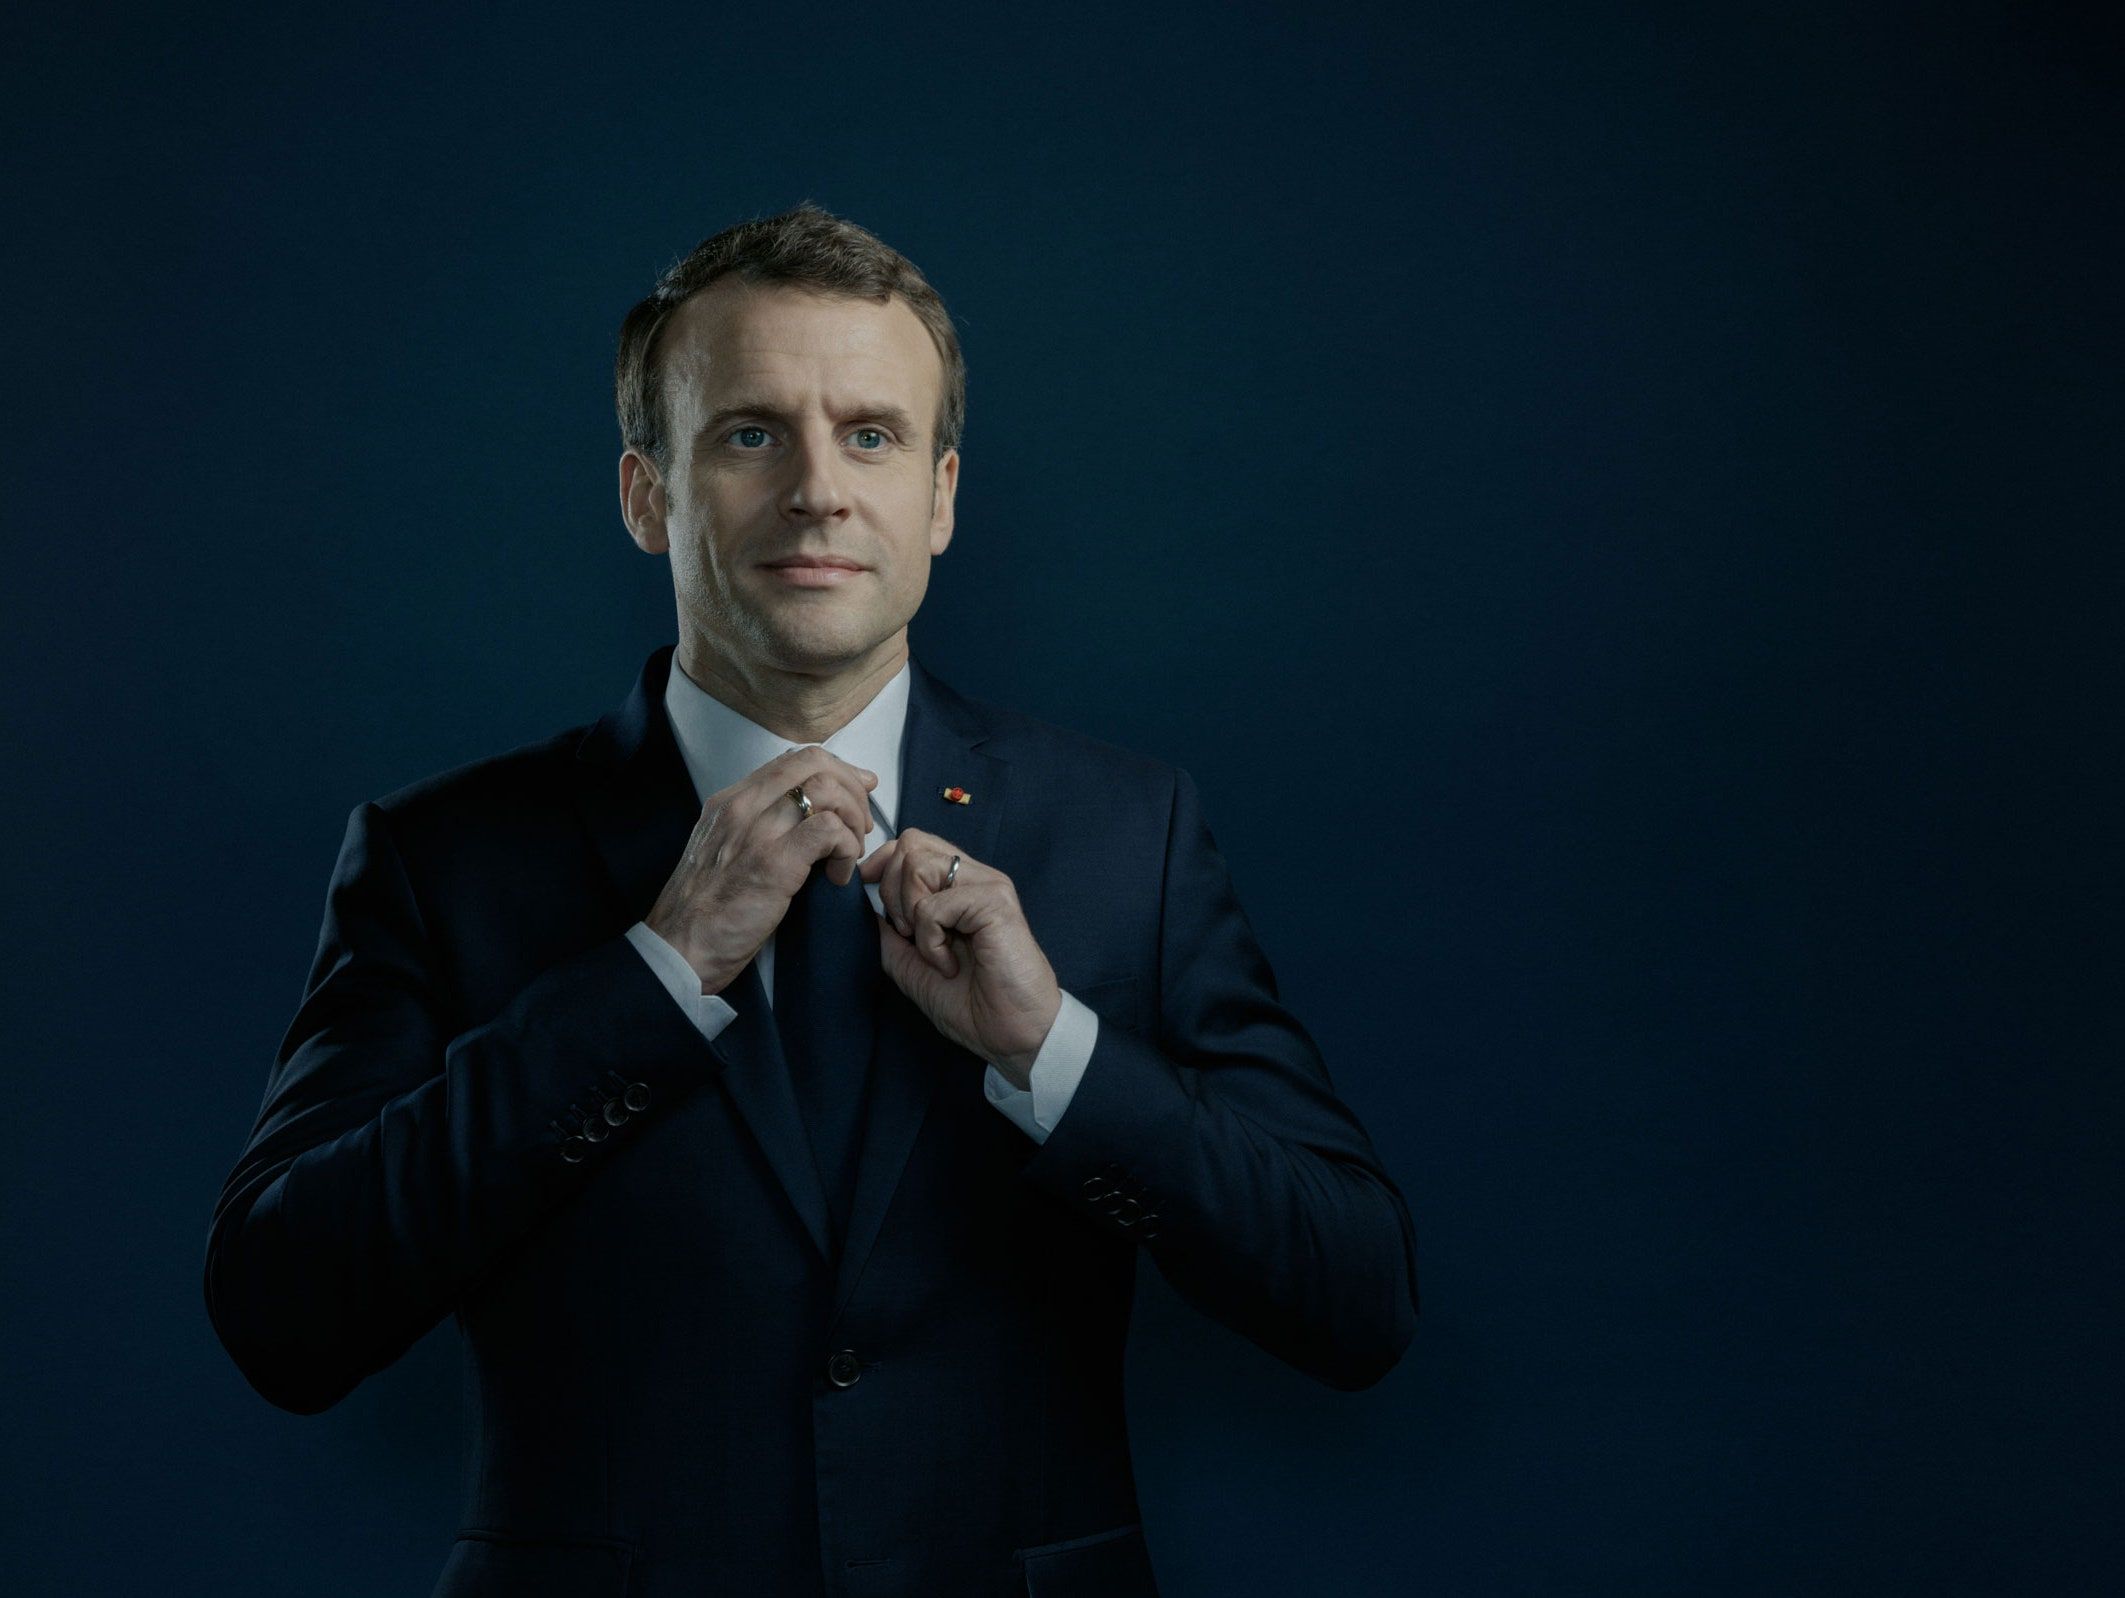 Emmanuel Macron Q&A: France's President Discusses Artificial Intelligence Strategy